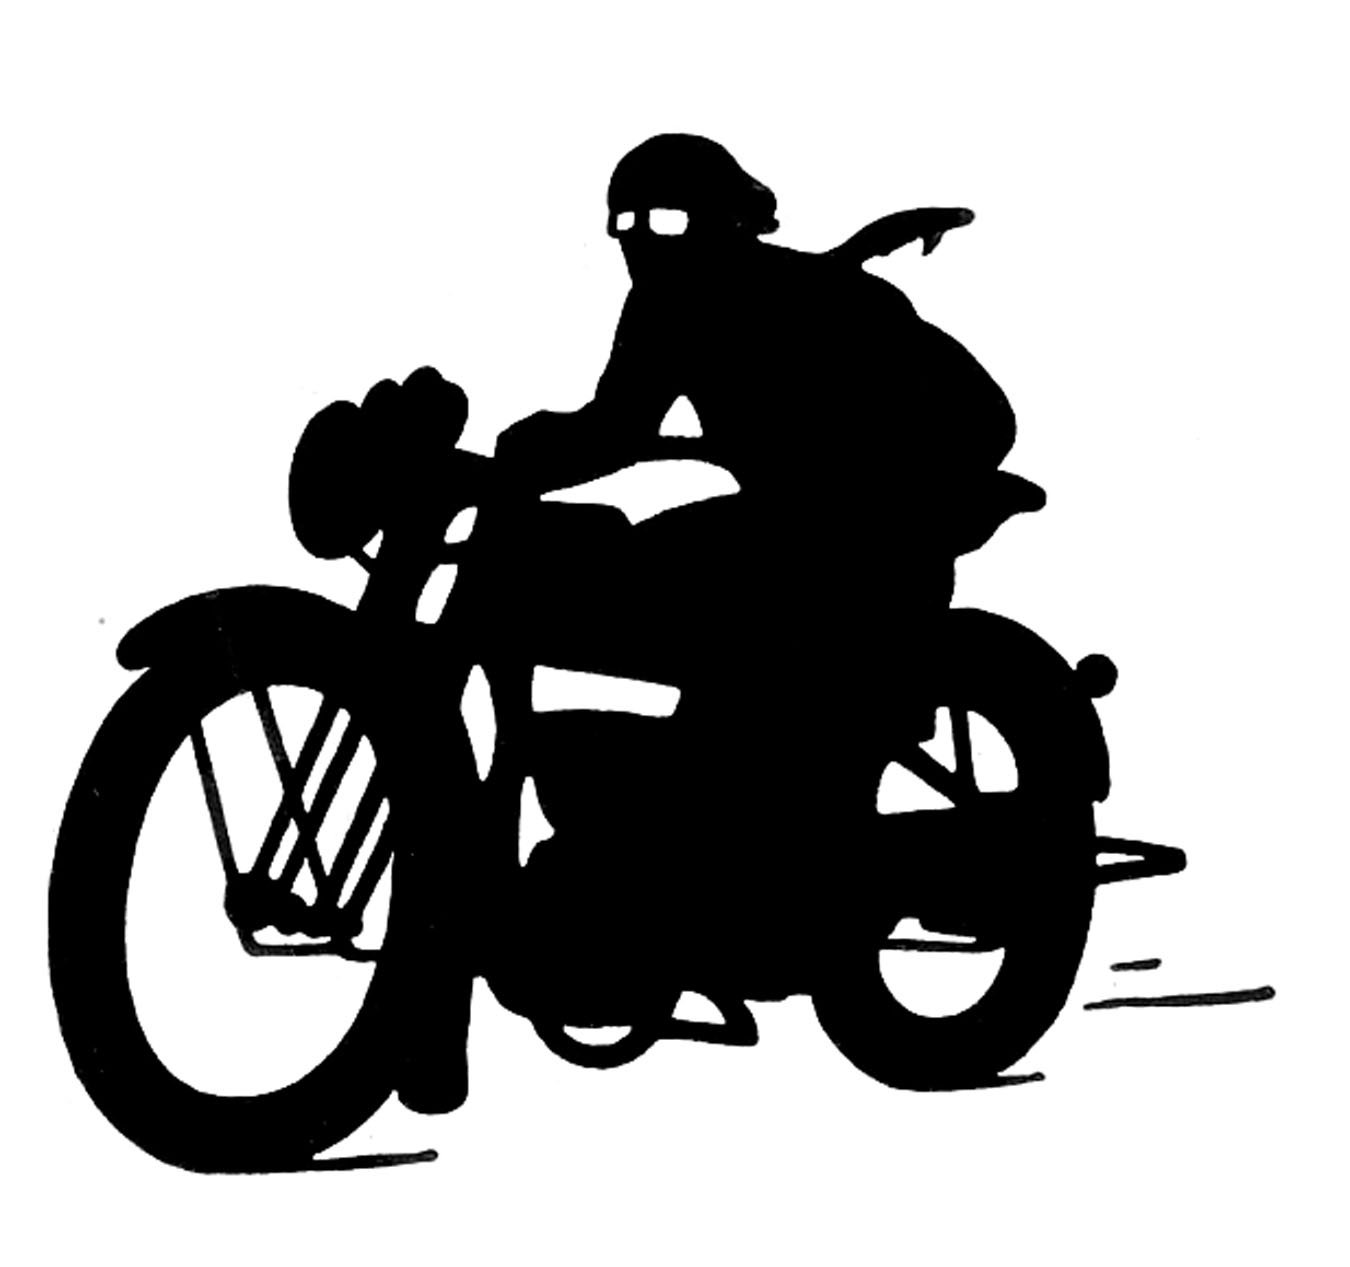 Amotorcyclevintageimagesgraphicsfairy003